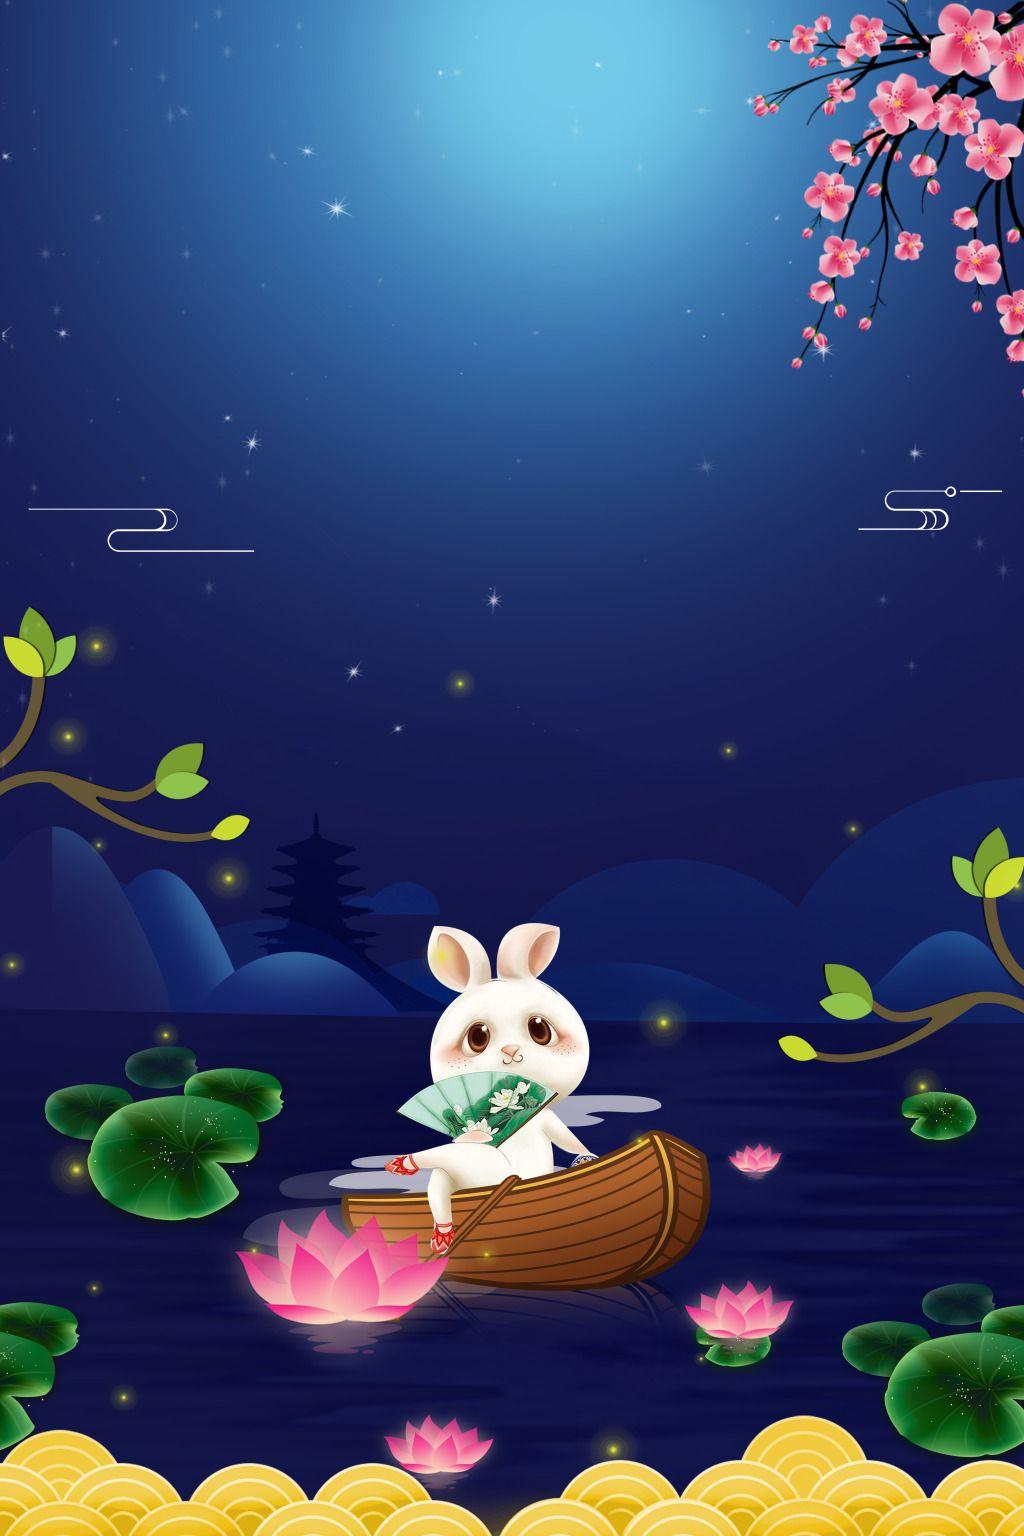 The blue background of Mid Autumn Festival. HeyPik in 2019